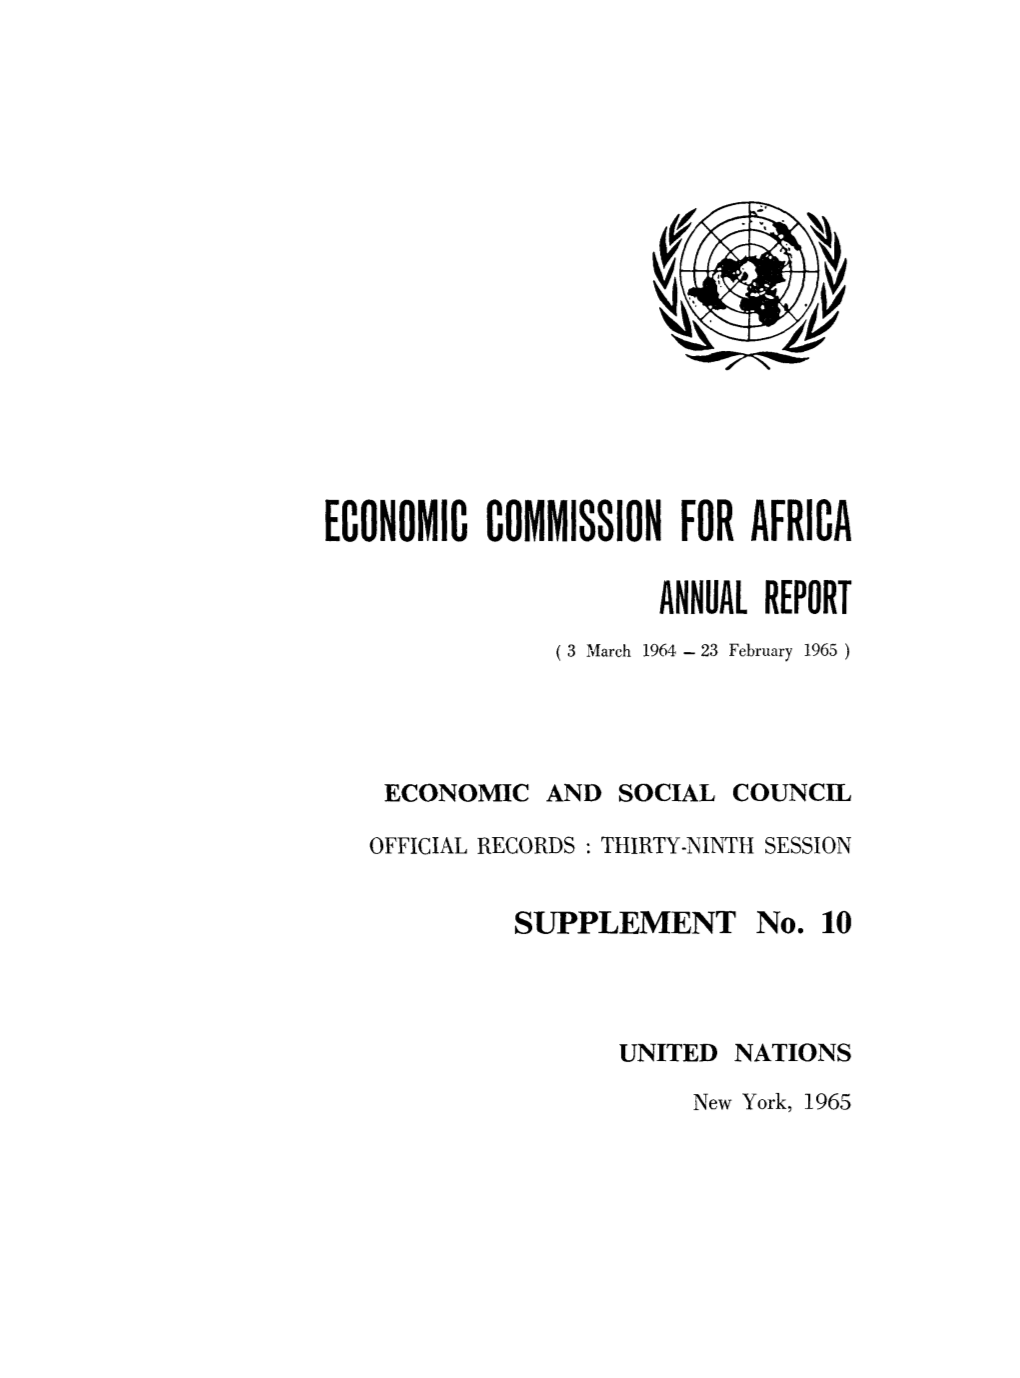 Economic Commission for Africa Annual Report